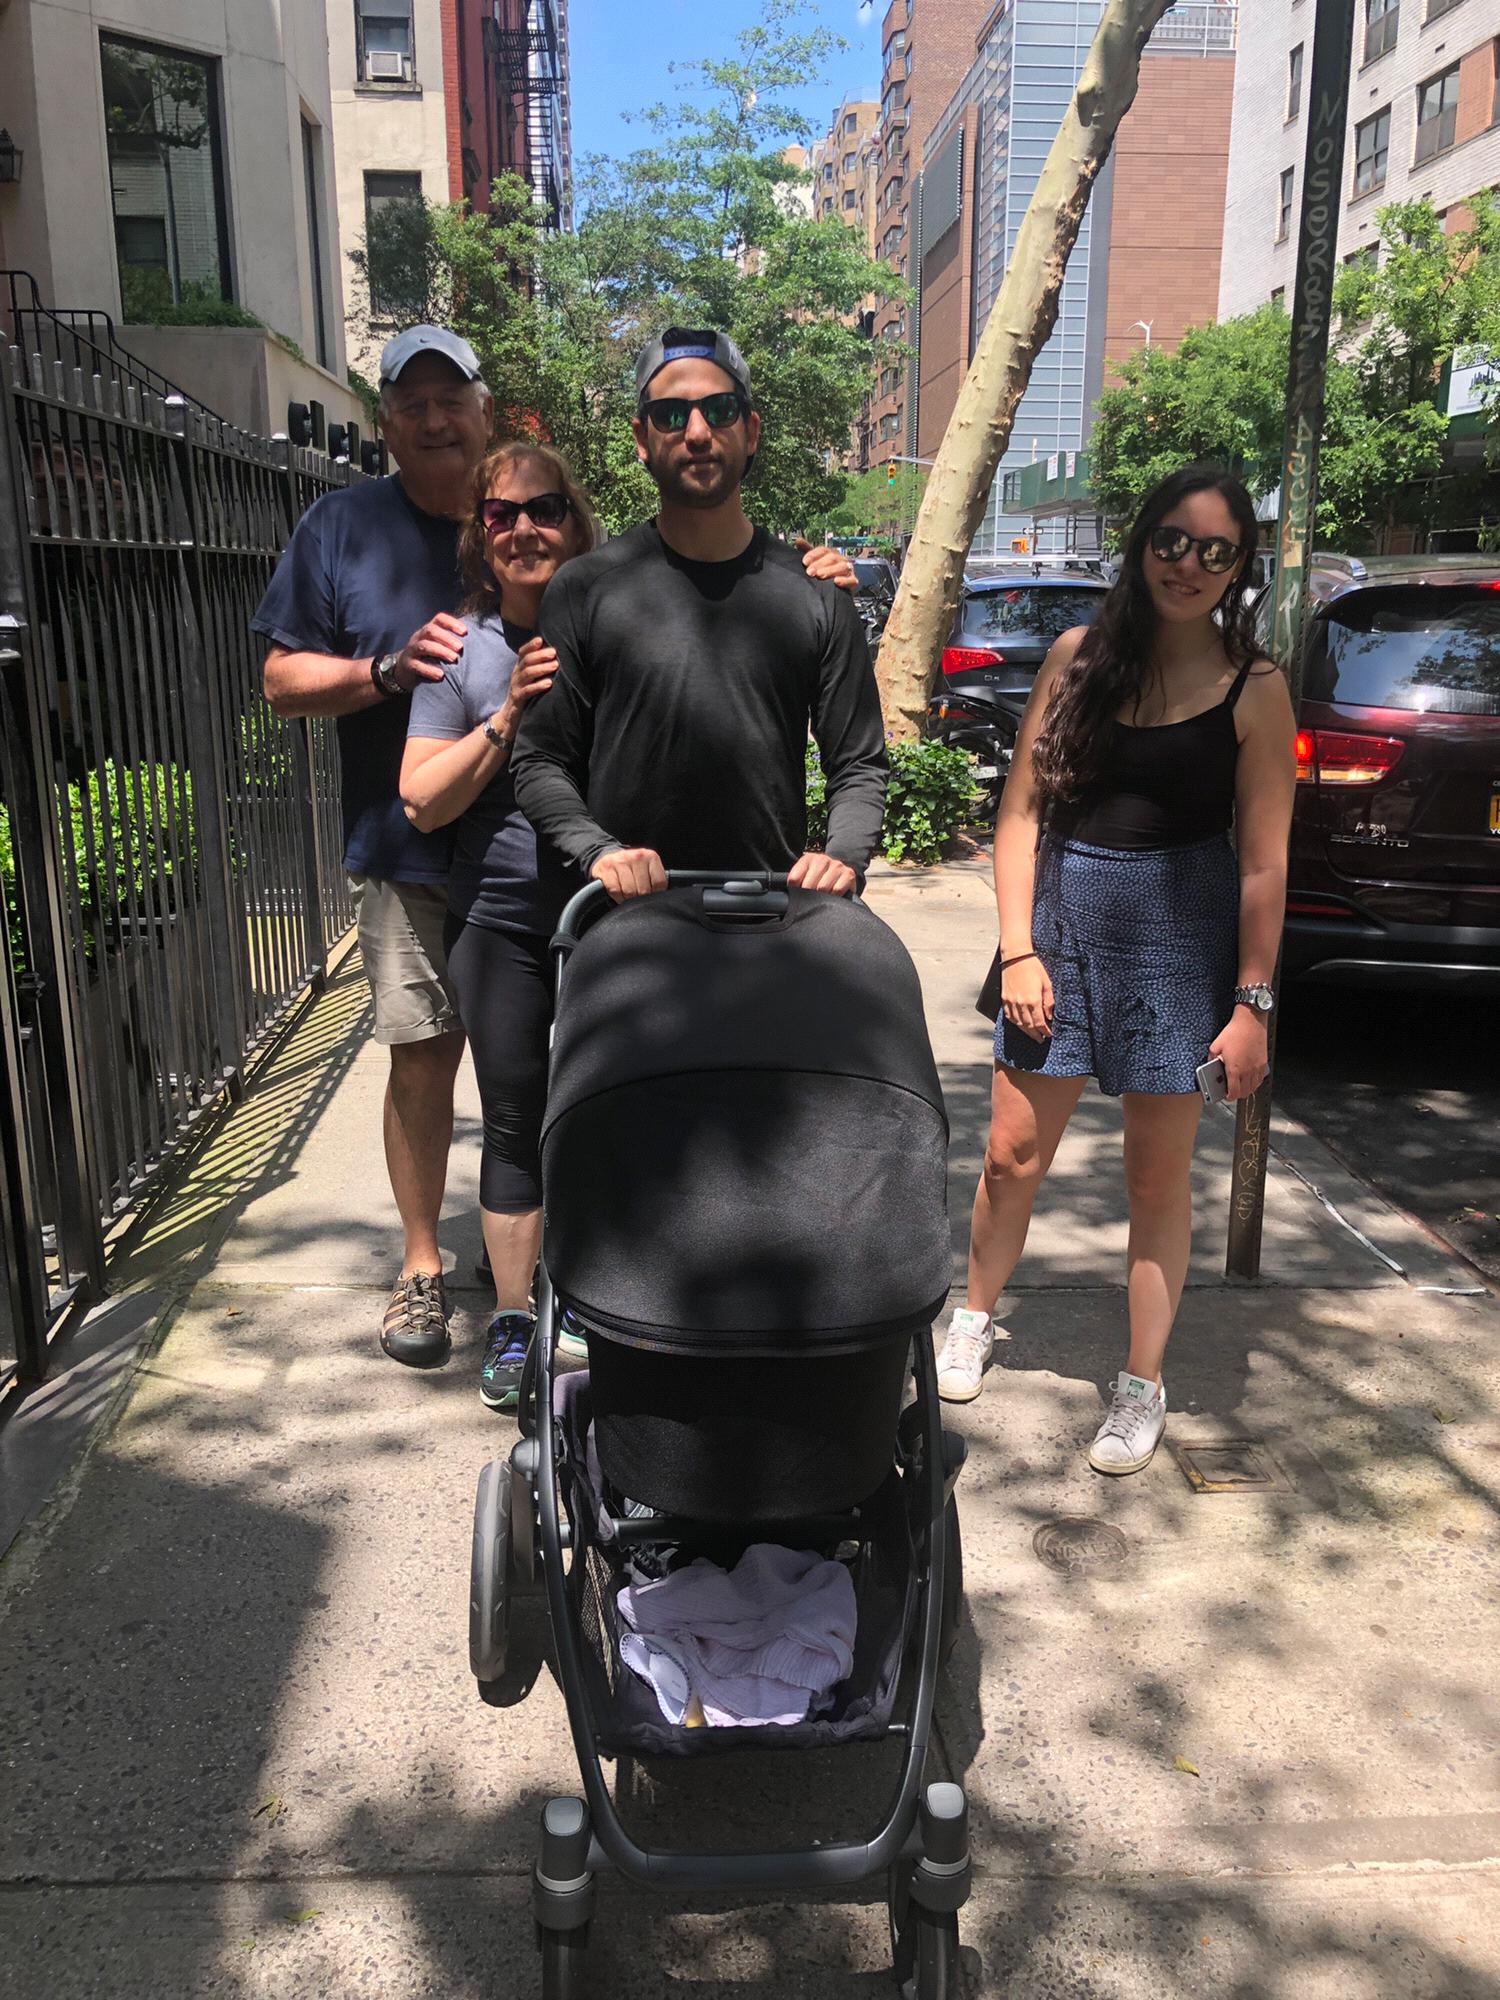 Shechtman family stroll minus Jake. Photo by me.